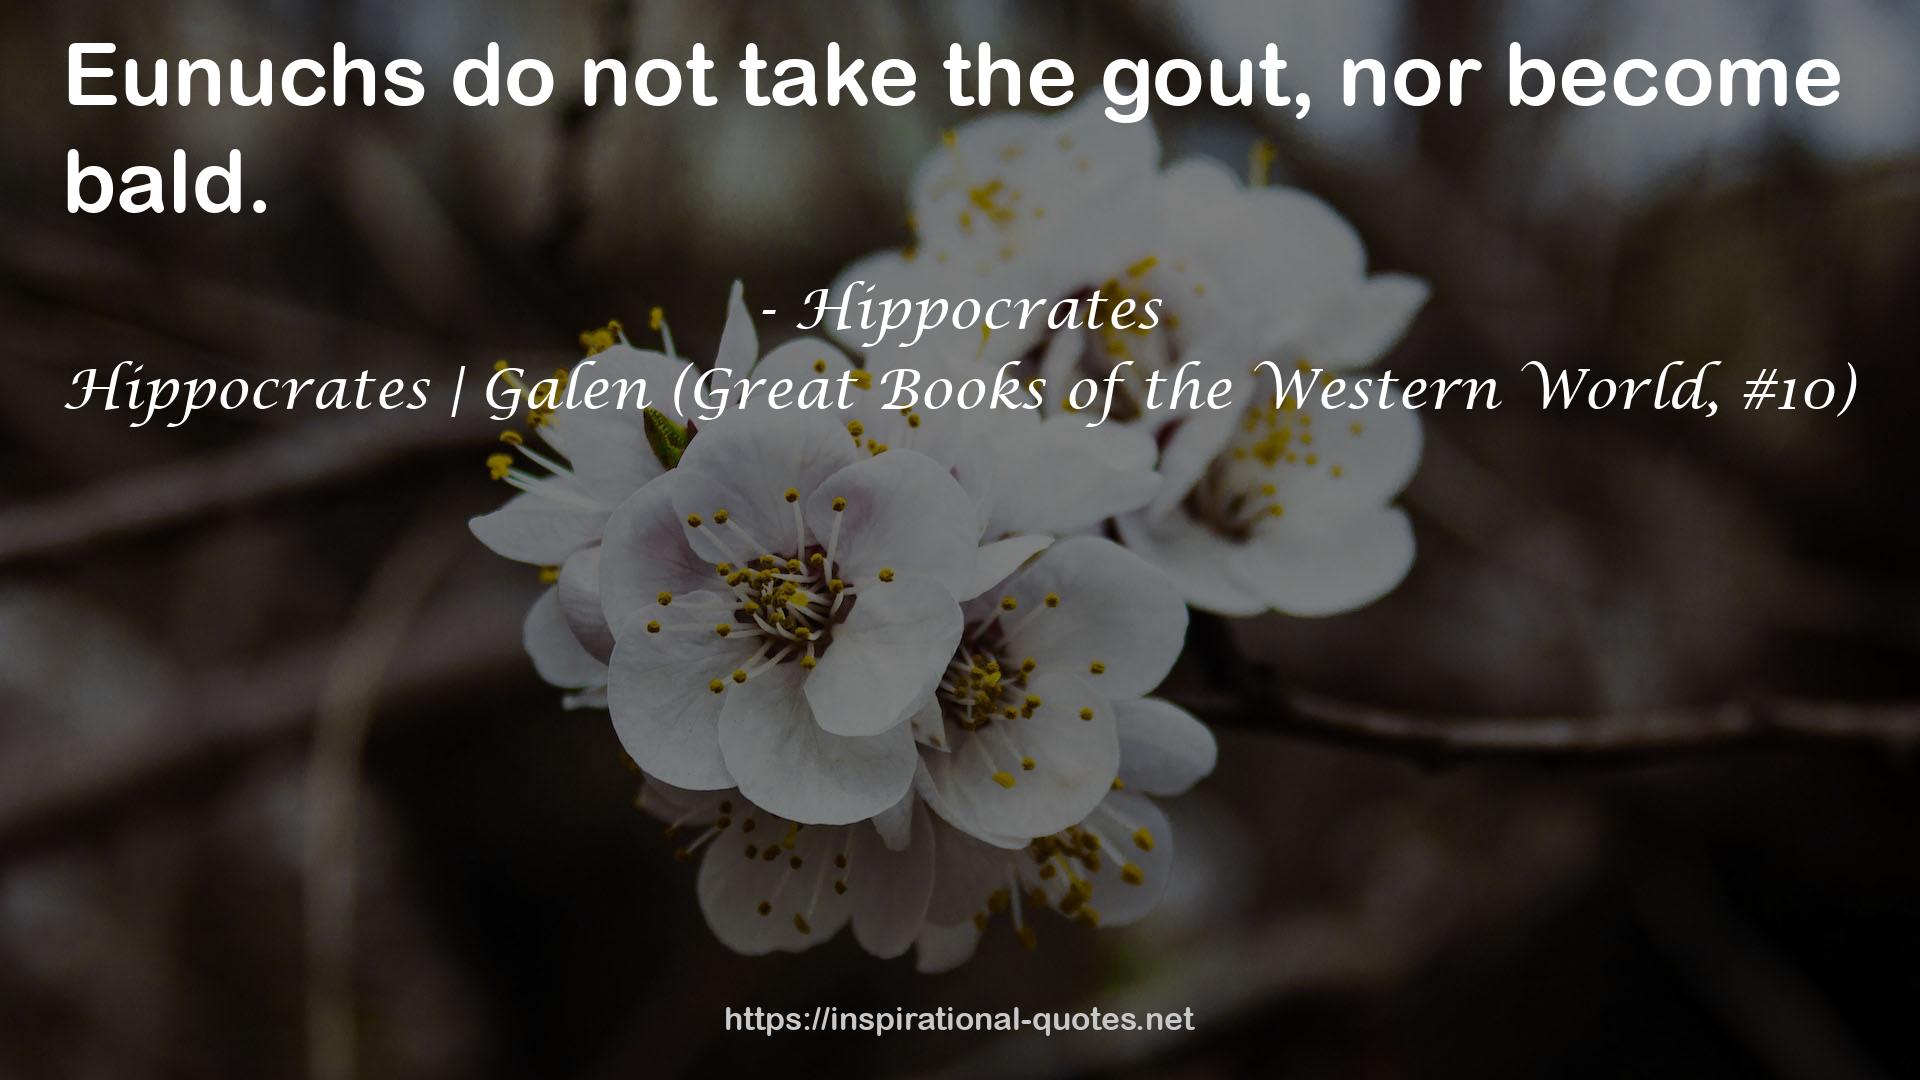 Hippocrates | Galen (Great Books of the Western World, #10) QUOTES